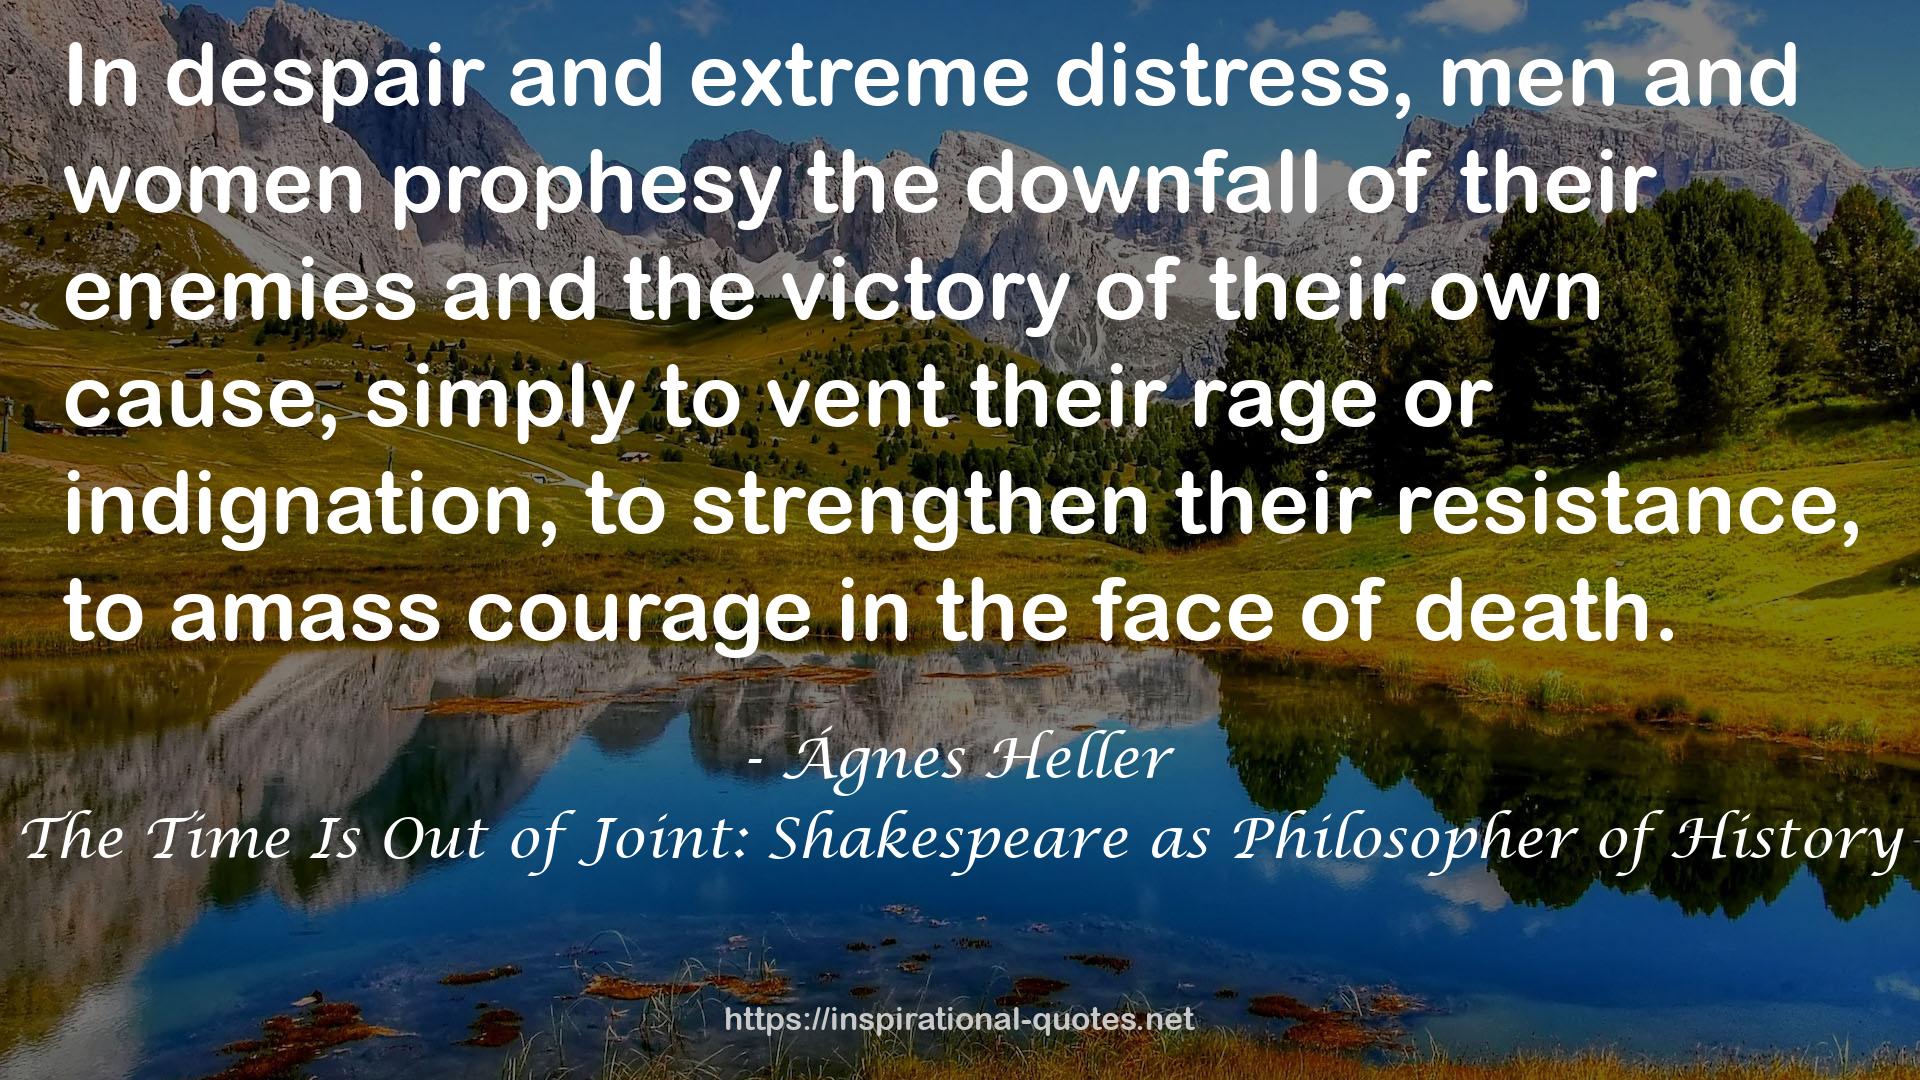 The Time Is Out of Joint: Shakespeare as Philosopher of History QUOTES